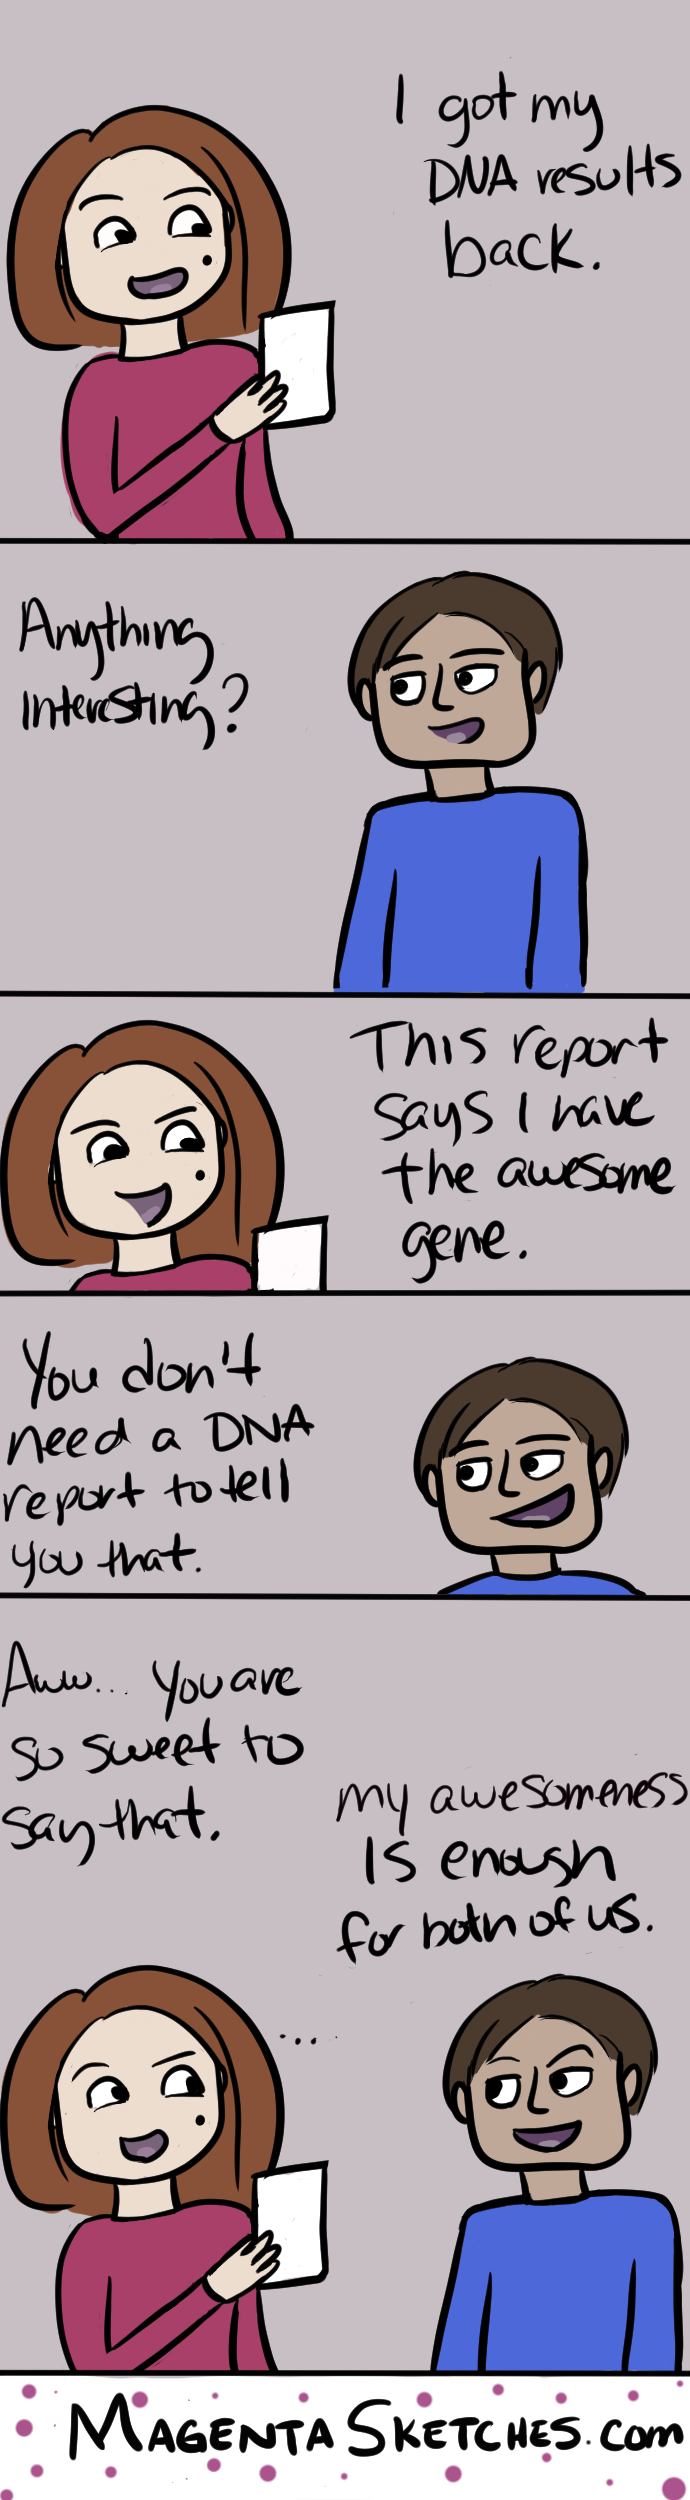 "Magenta receives her DNA results that says she has the awesome gene to which Jazz says she didn't need a test for that because he has so much awesome that he rubs off on her.